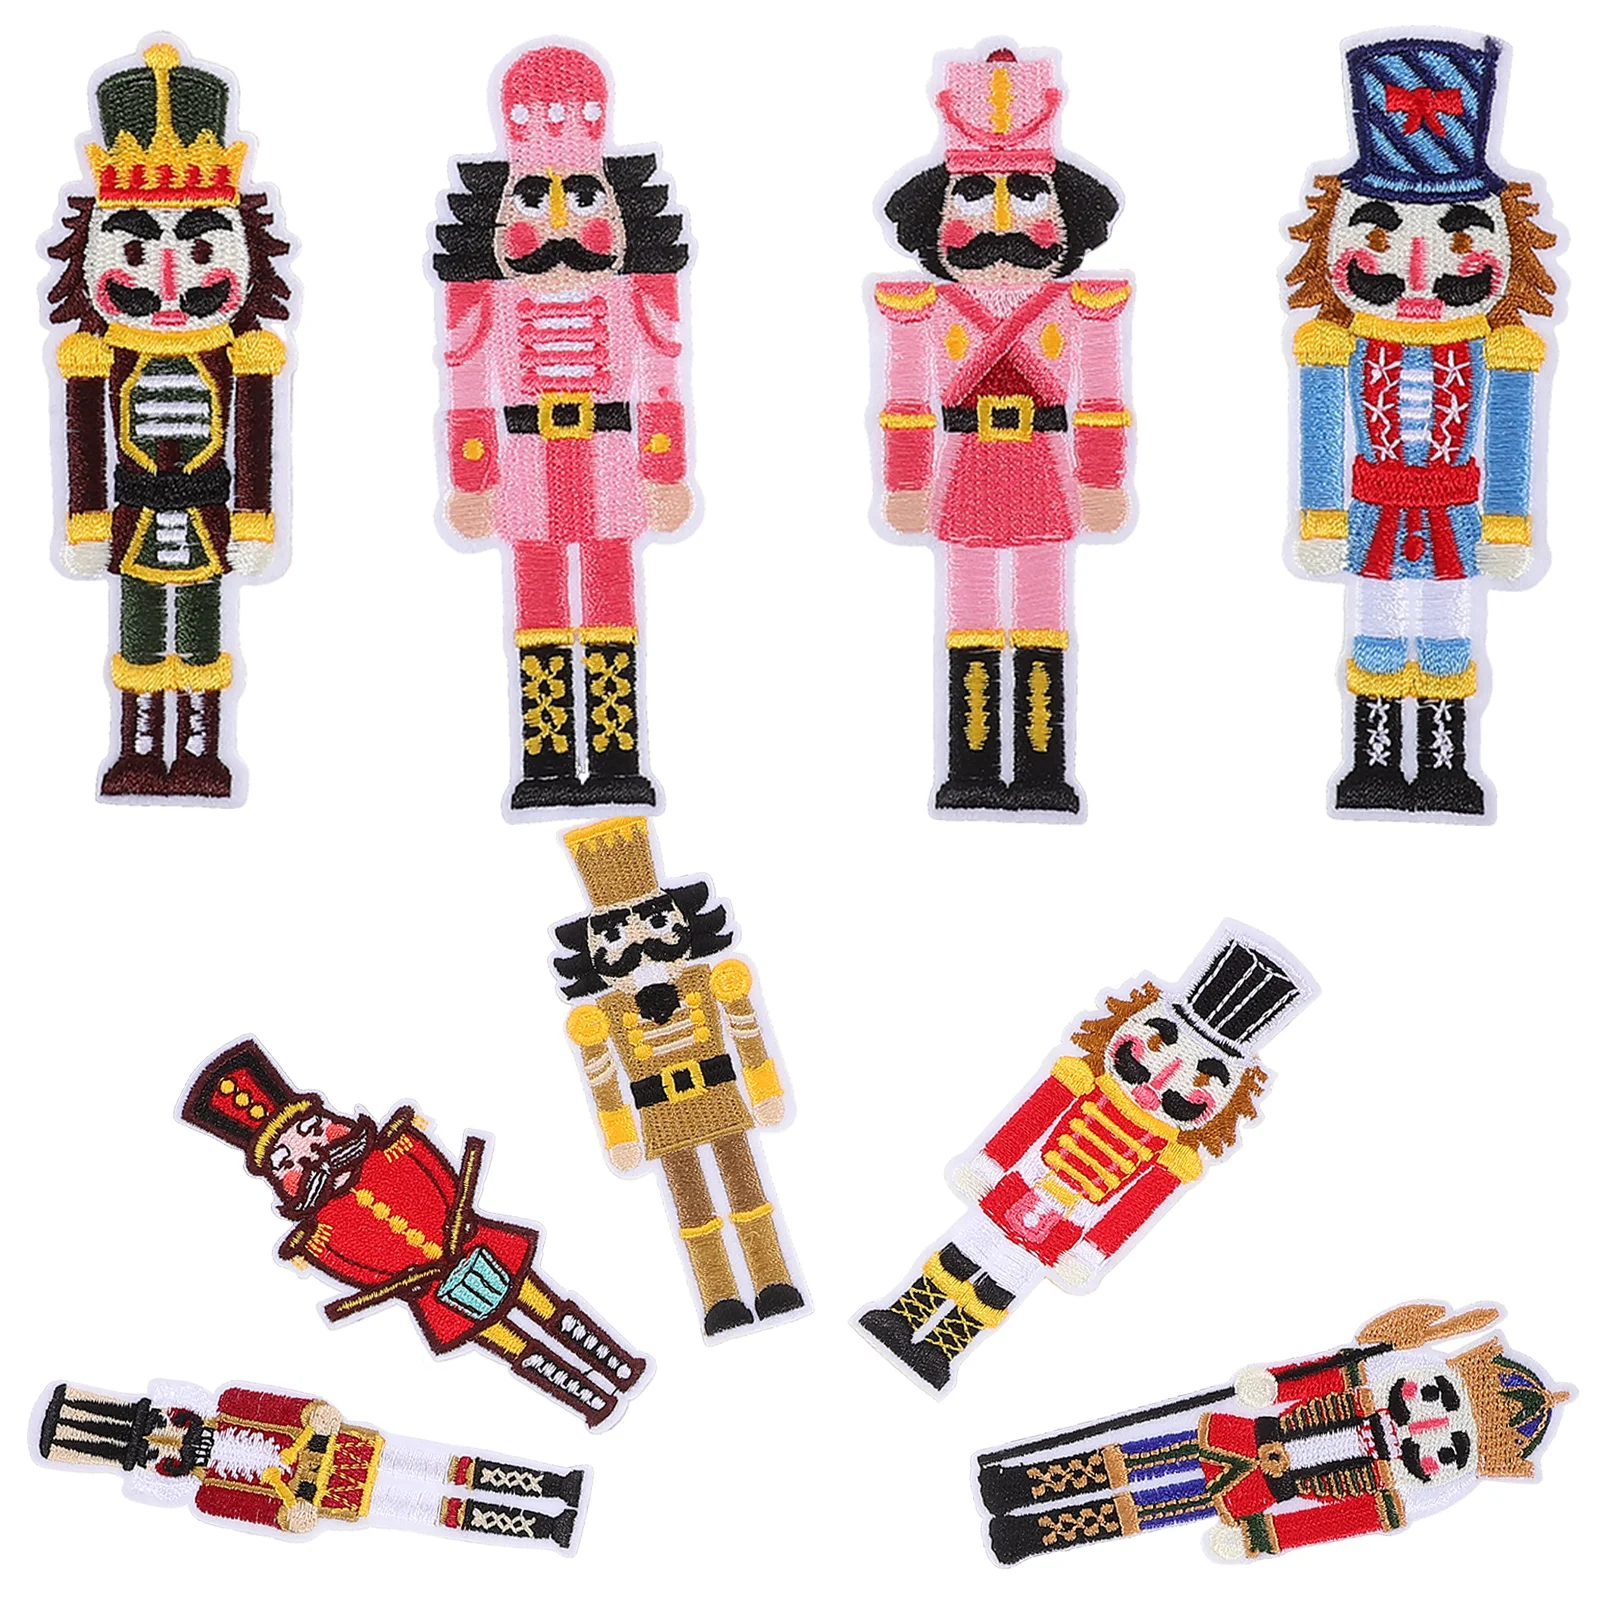 

Christmas Nutcracker Iron Patches Soldier Figures Sew Embroidered Applique Repair Patch Diy Crafts Gifts Xmas Winter Holiday Hat